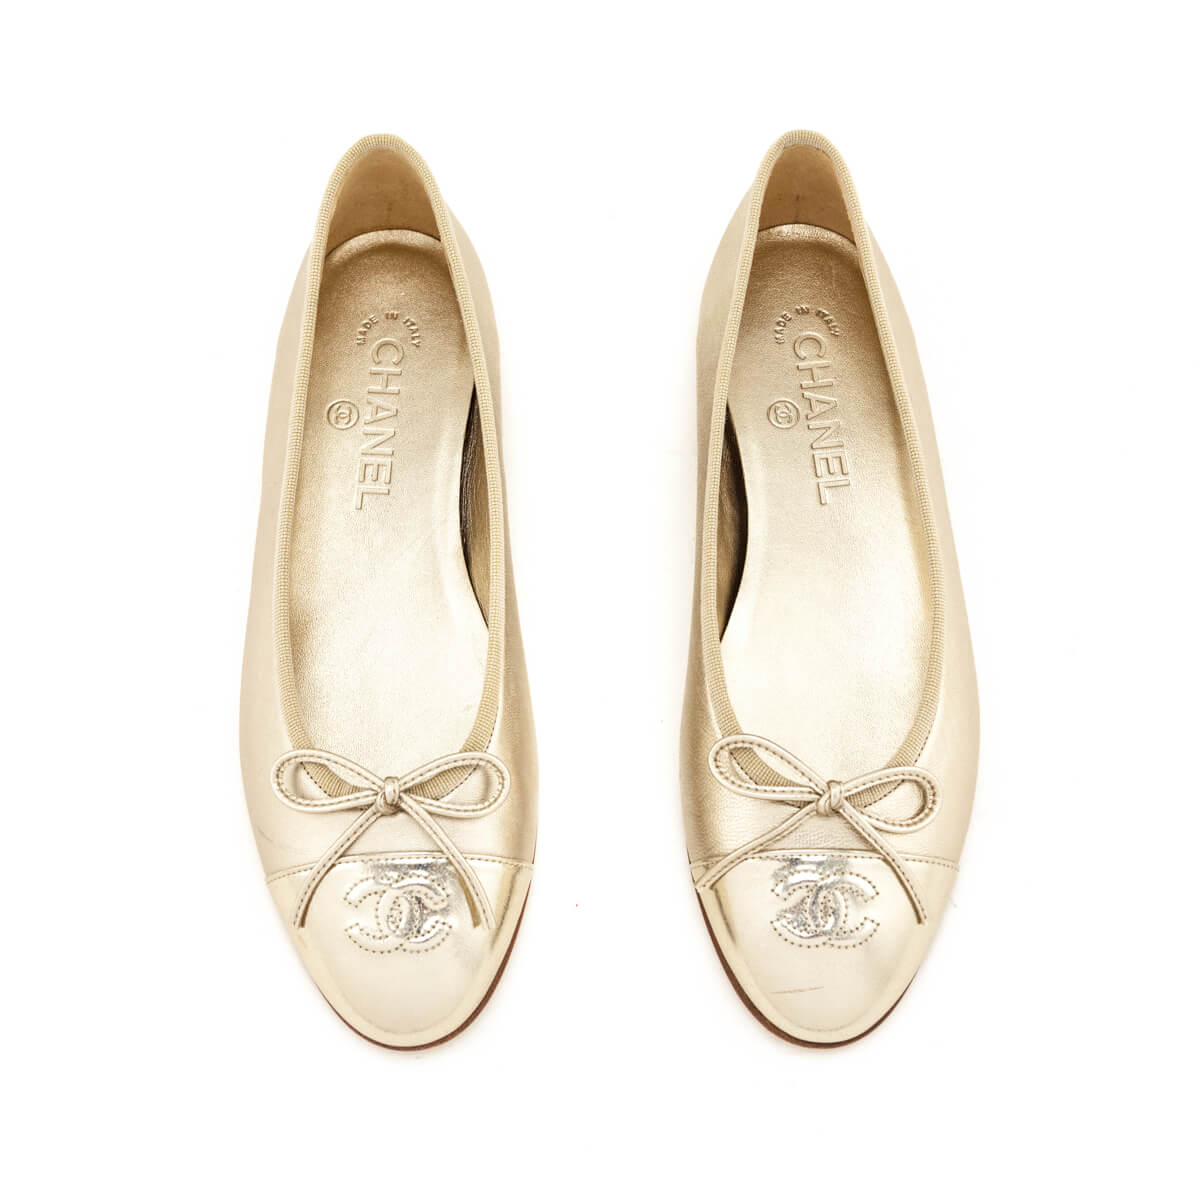 Chanel Gold Cap Toe Ballet Flats Size US 8 | EU 38 - Love that Bag etc - Preowned Authentic Designer Handbags & Preloved Fashions